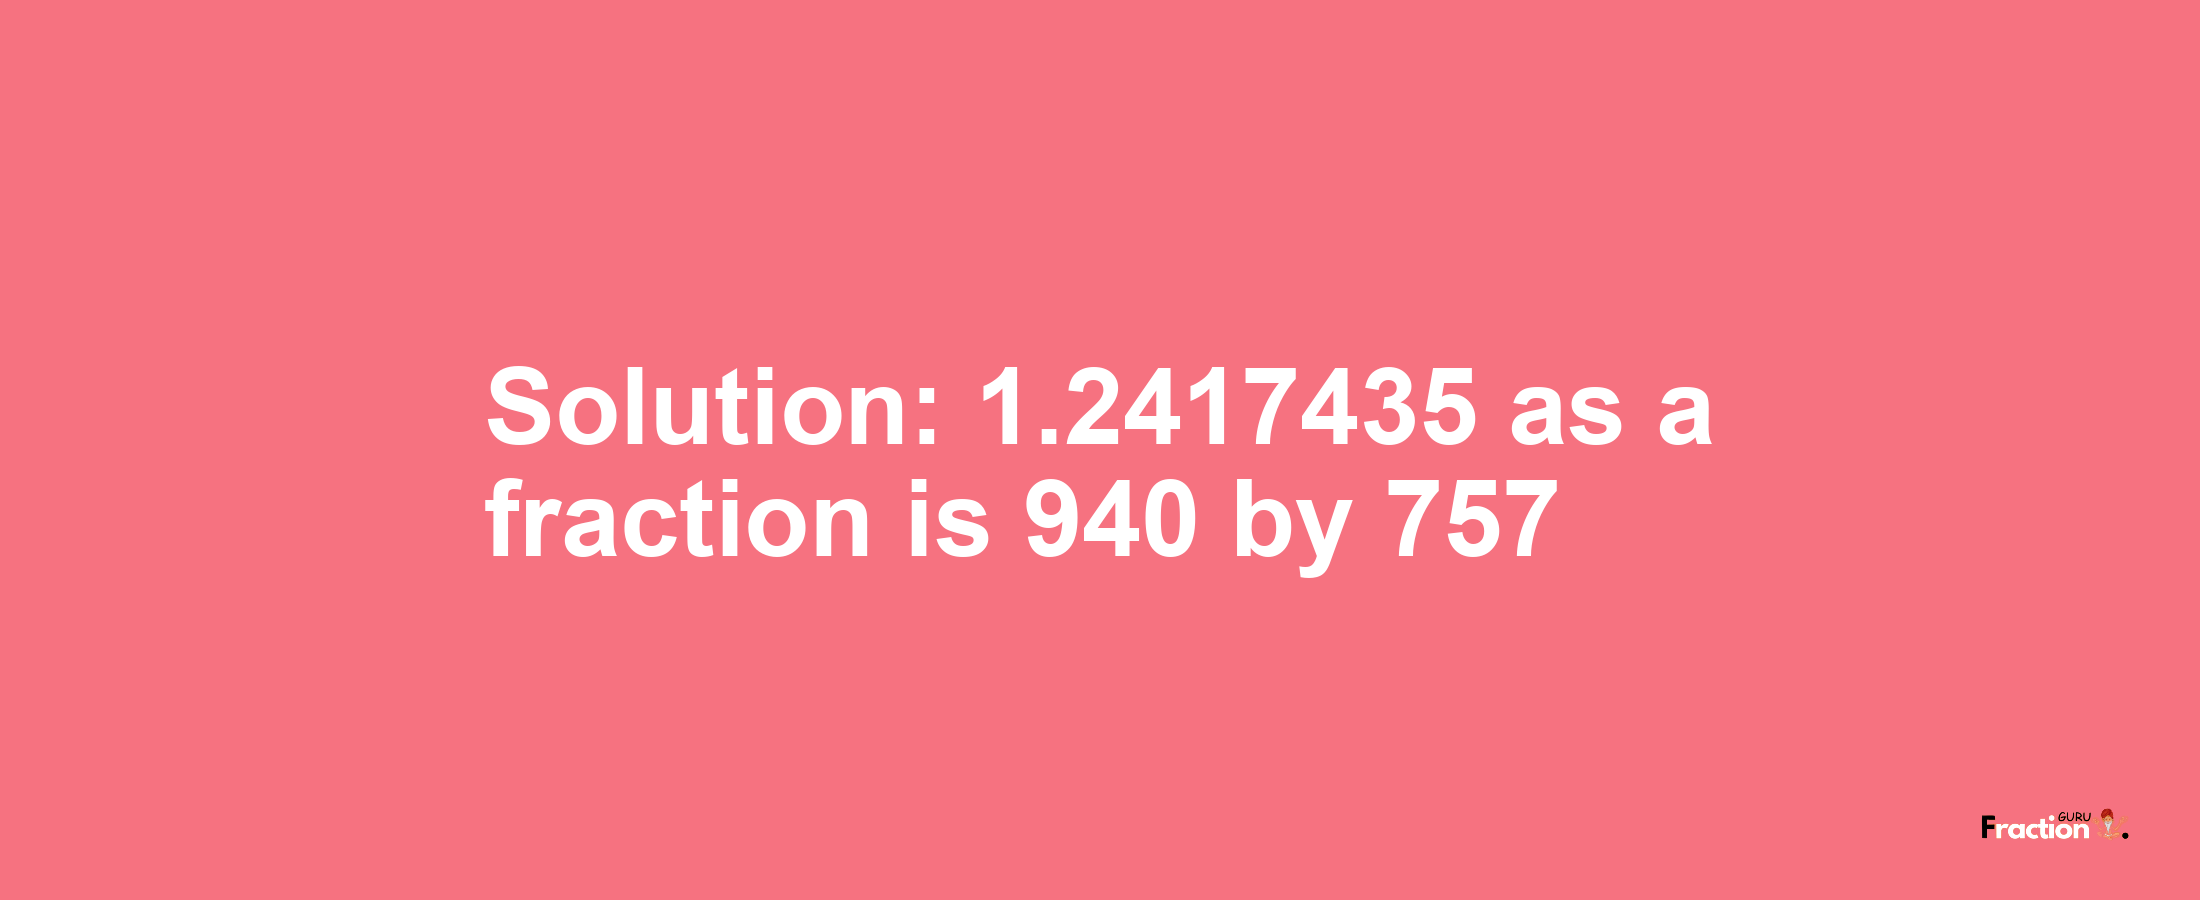 Solution:1.2417435 as a fraction is 940/757